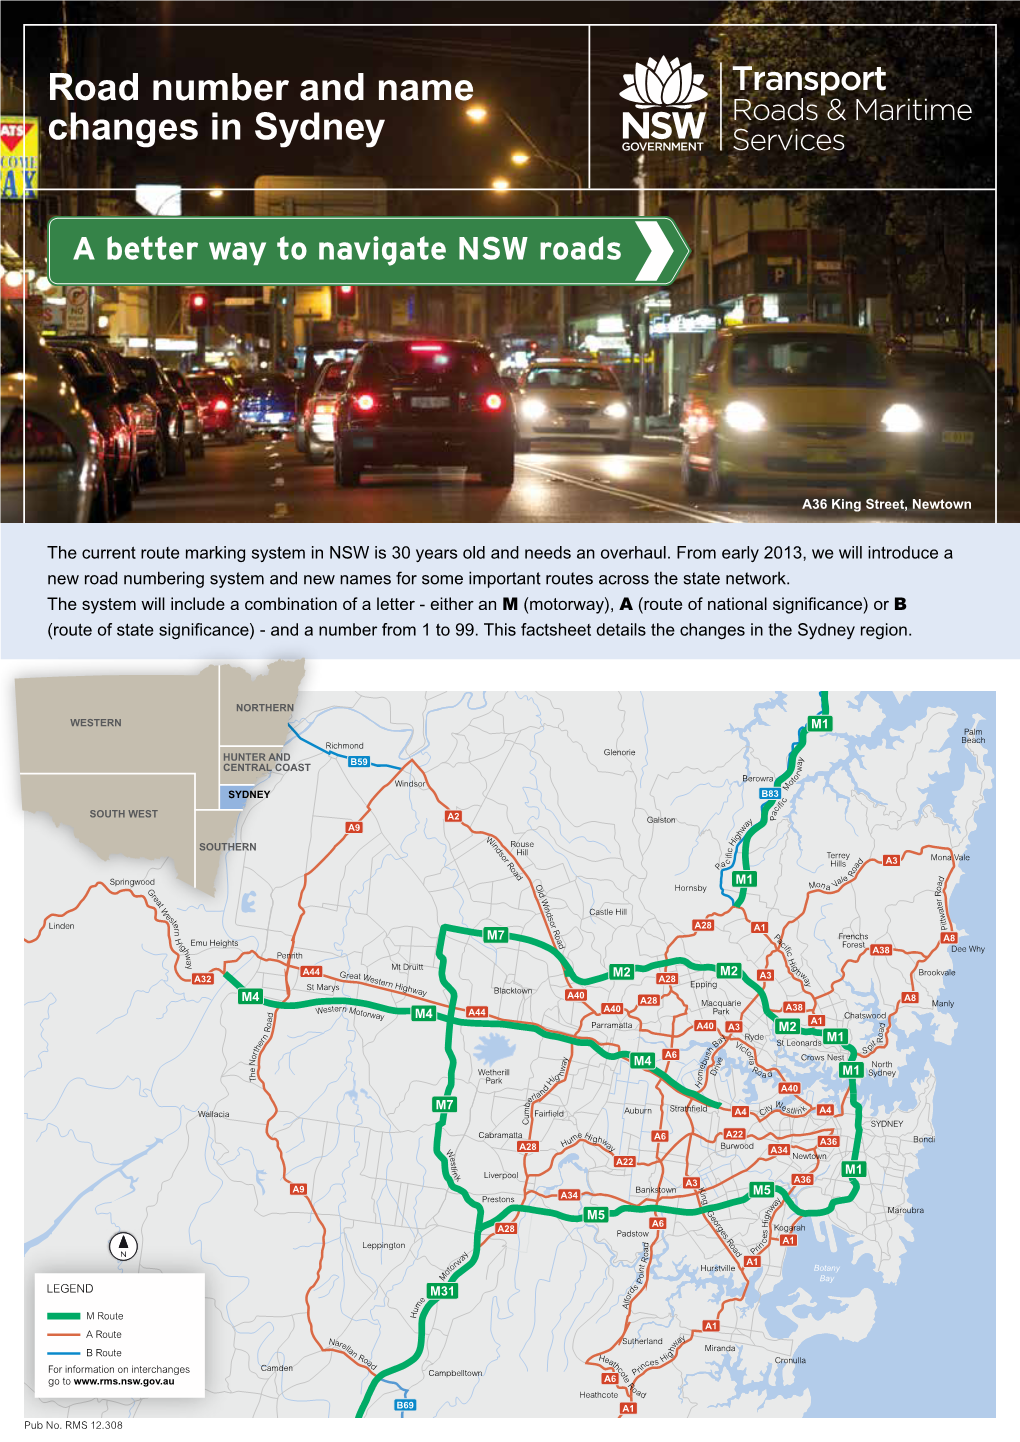 RMS-RTA NSW New Road Number System 2013.Pdf